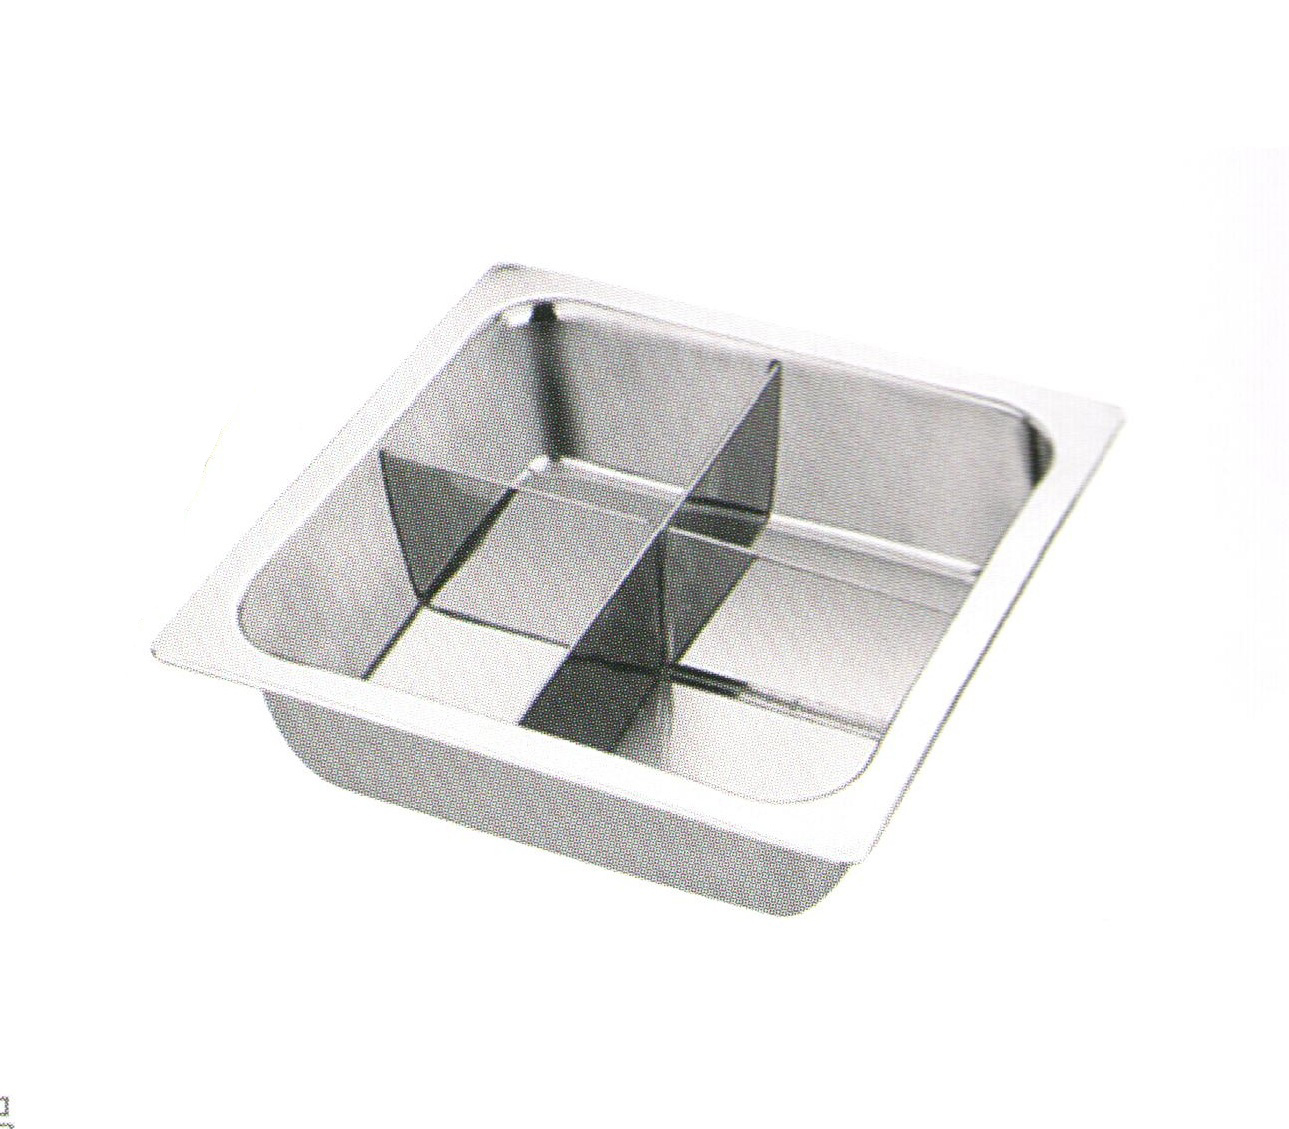 Popular Design for Folding Fork Spoon -
 Stainless Steel Four Flavor Square Hot Pot with Two Stainless Steel Division Plates HP006 – Long Prosper